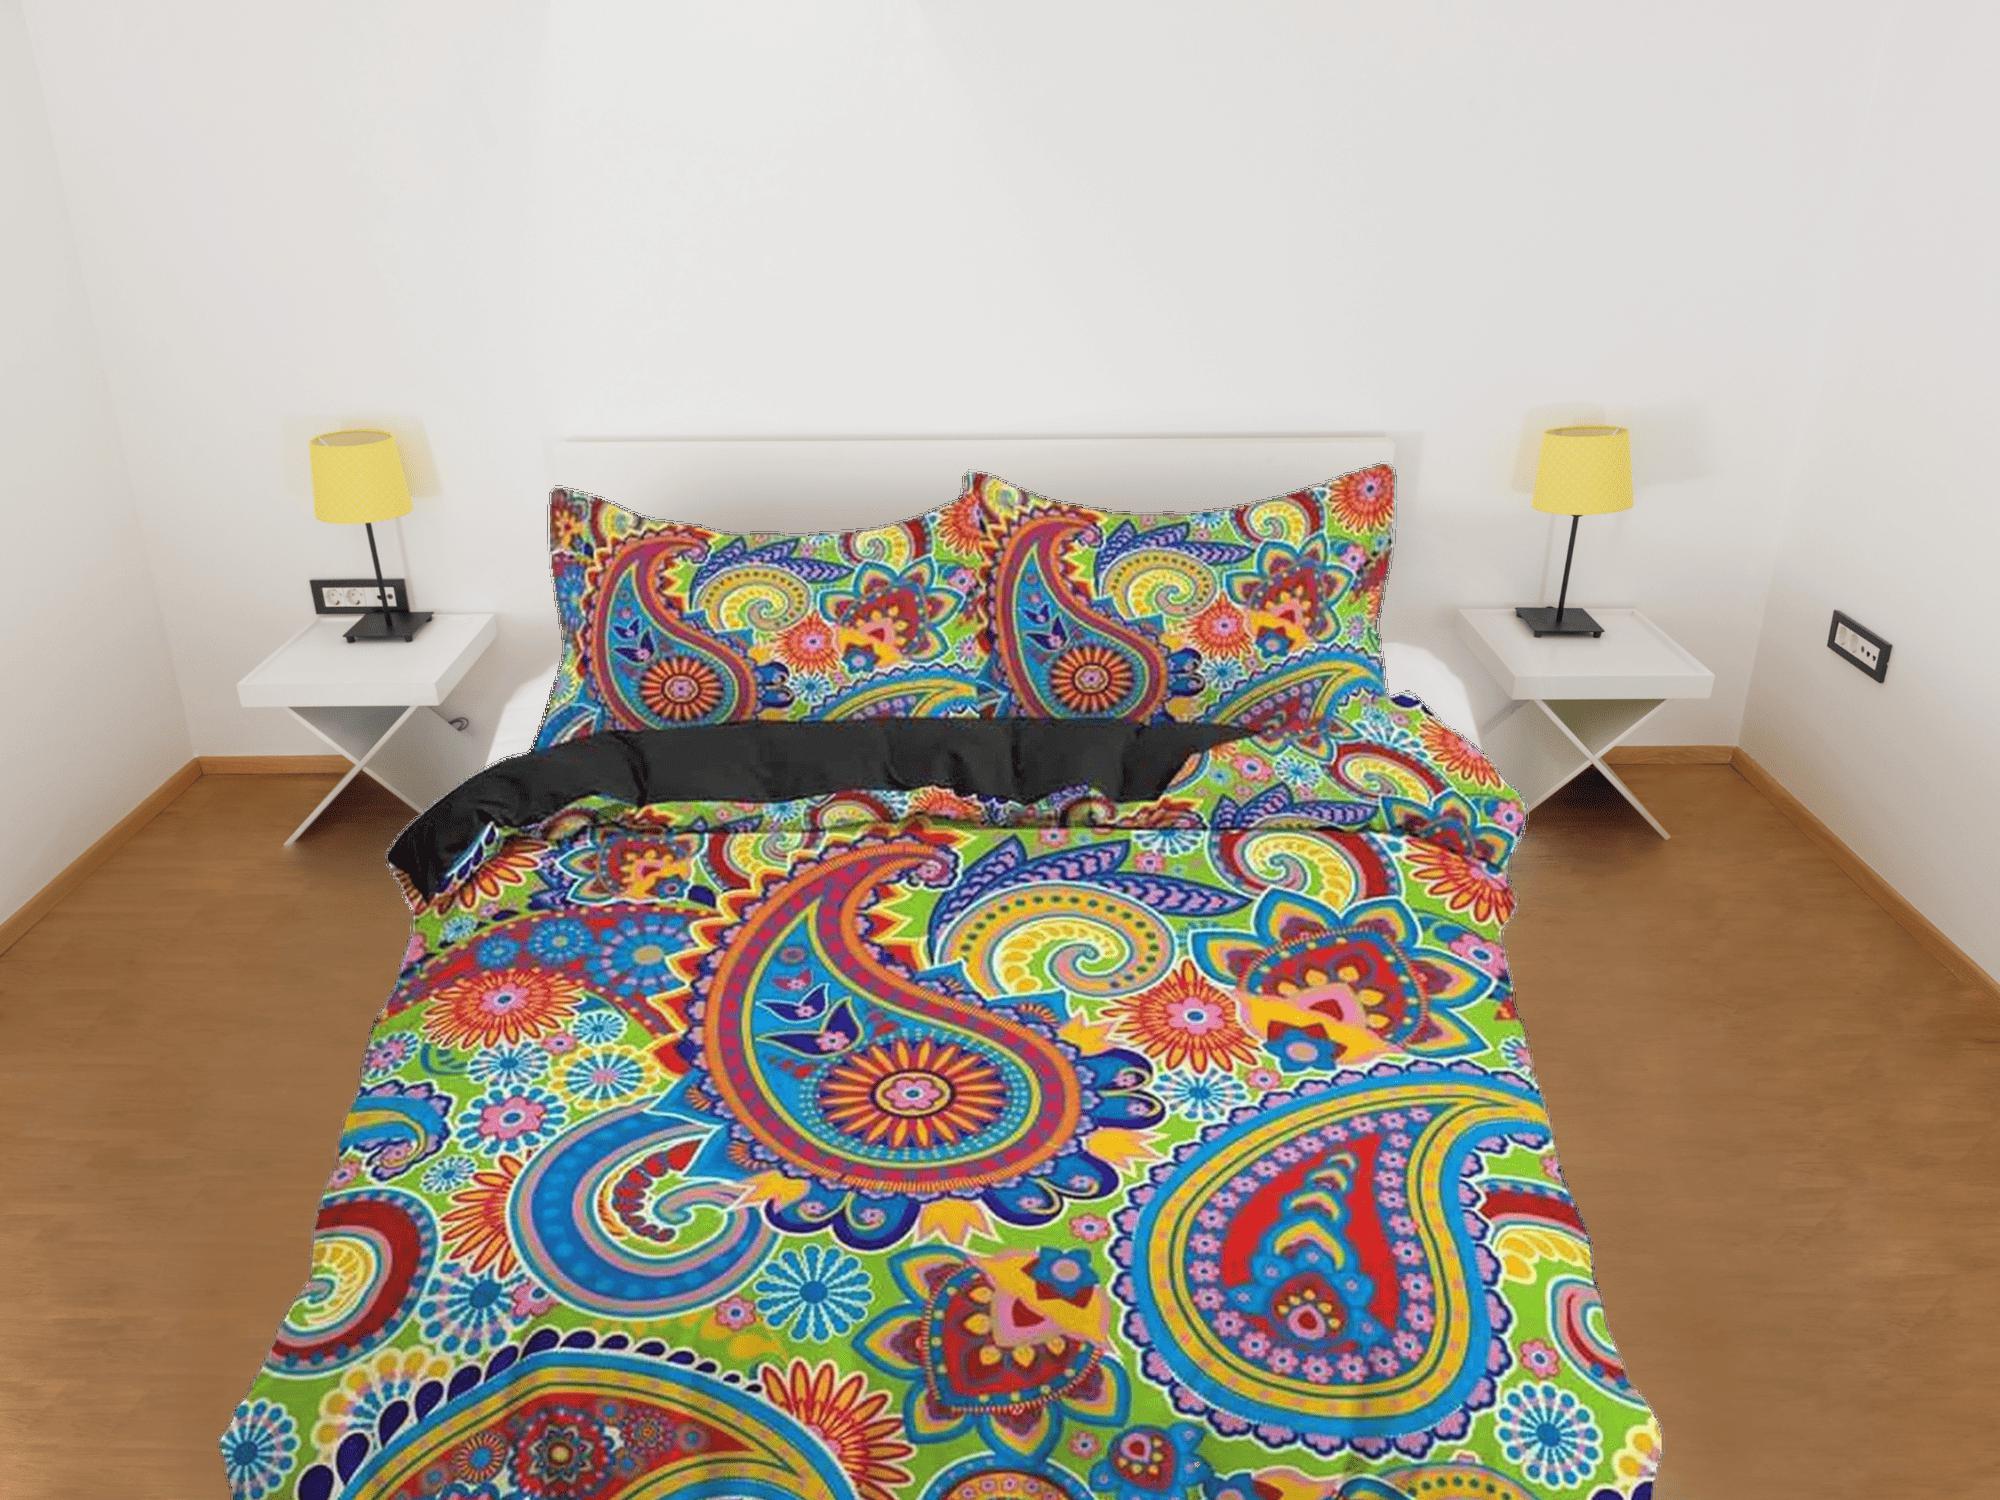 daintyduvet Colorful paisley yellow green duvet cover set, aesthetic room decor bedding set full, king, queen size, abstract boho bedspread artistic